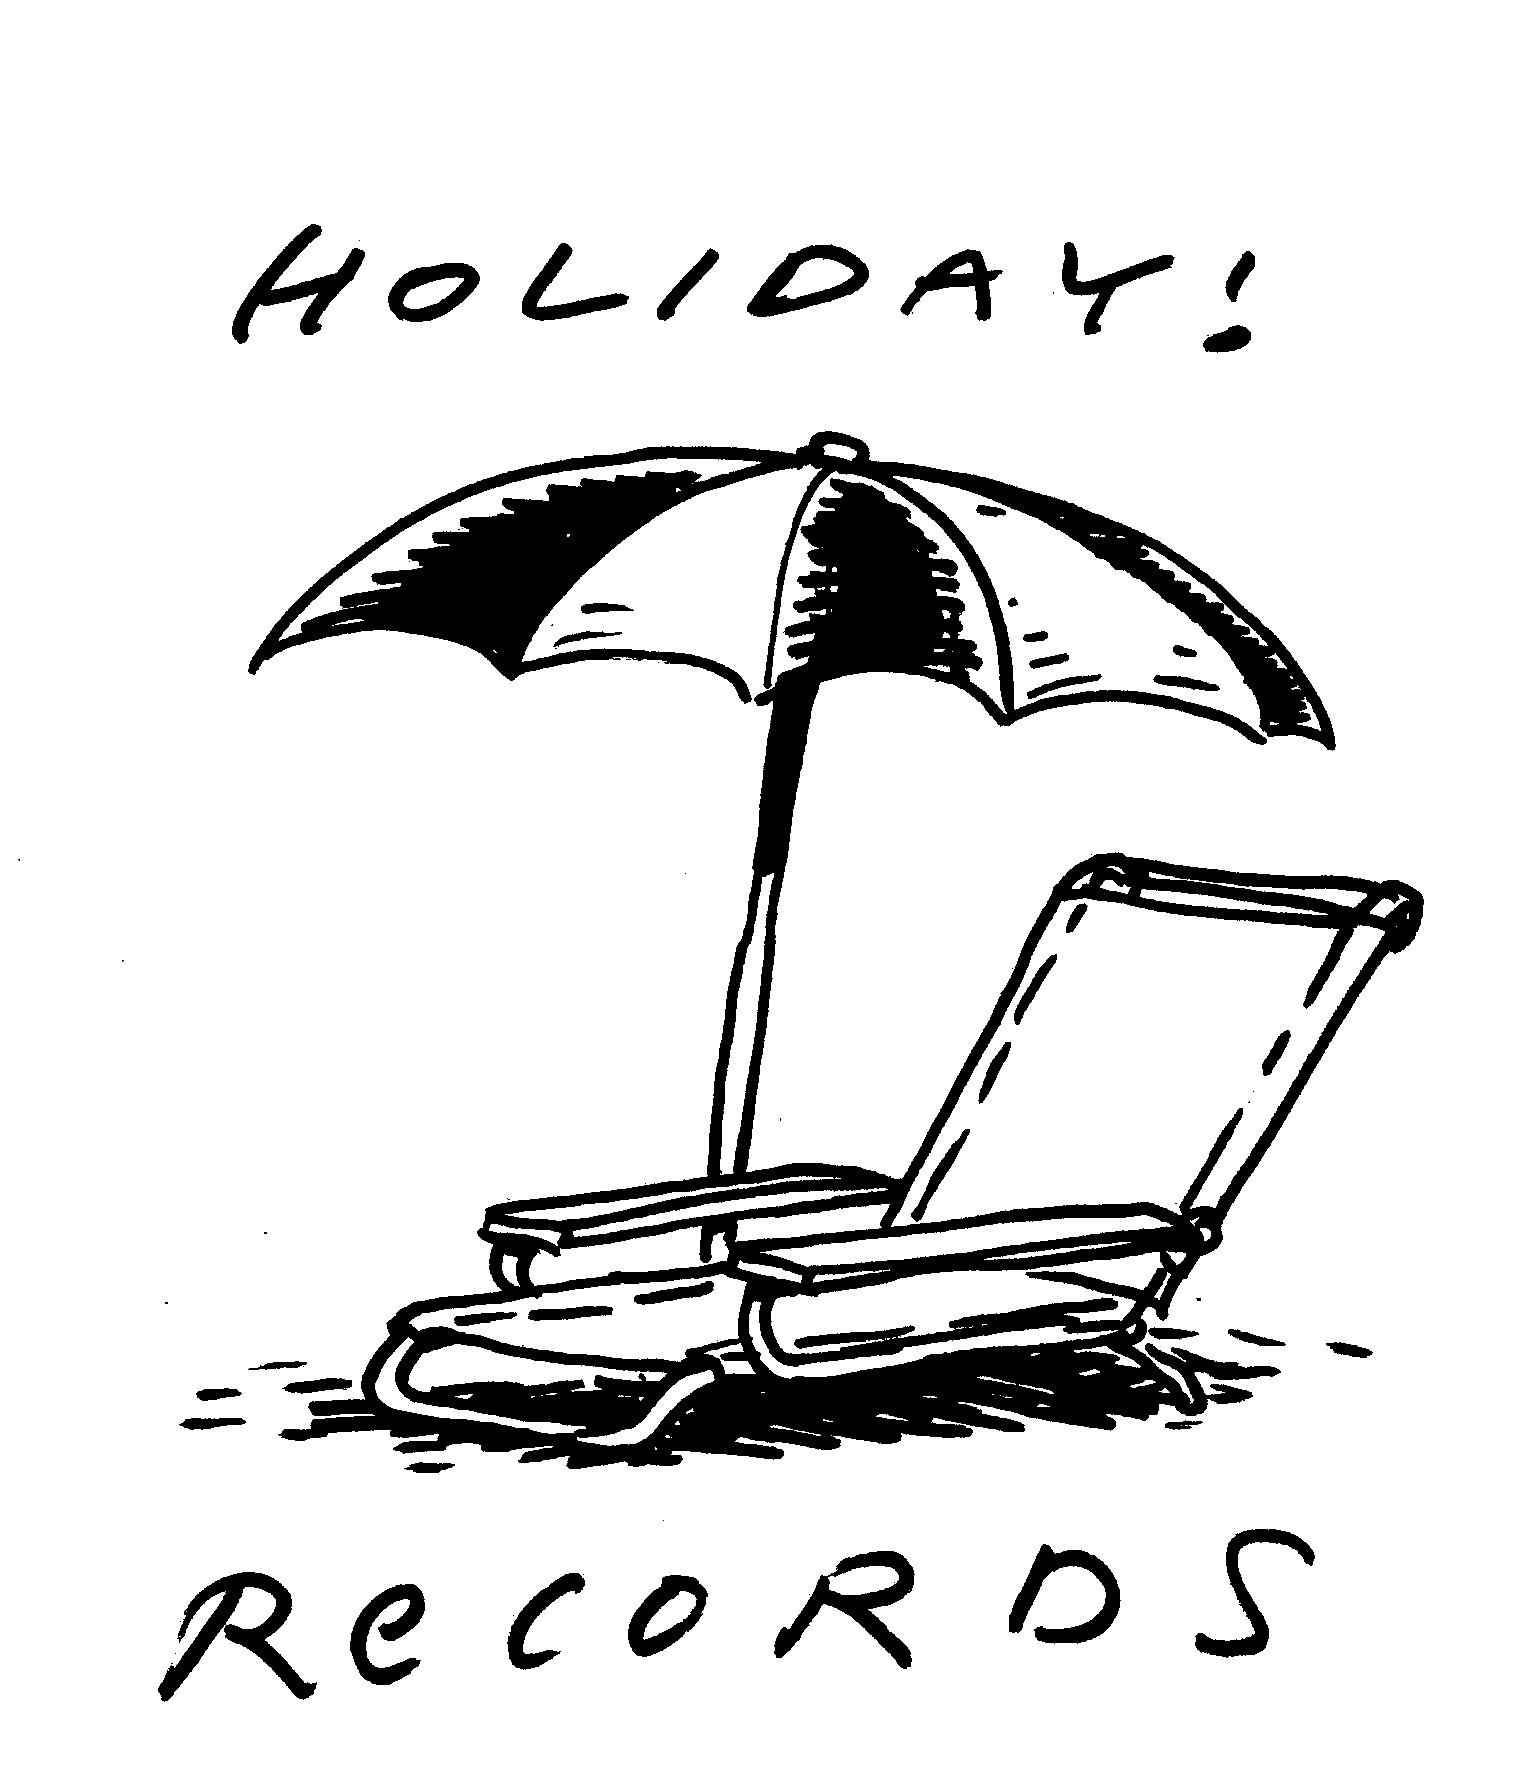 http://rooftop.cc/news/2017/12/07/holiday_records_logo.jpg